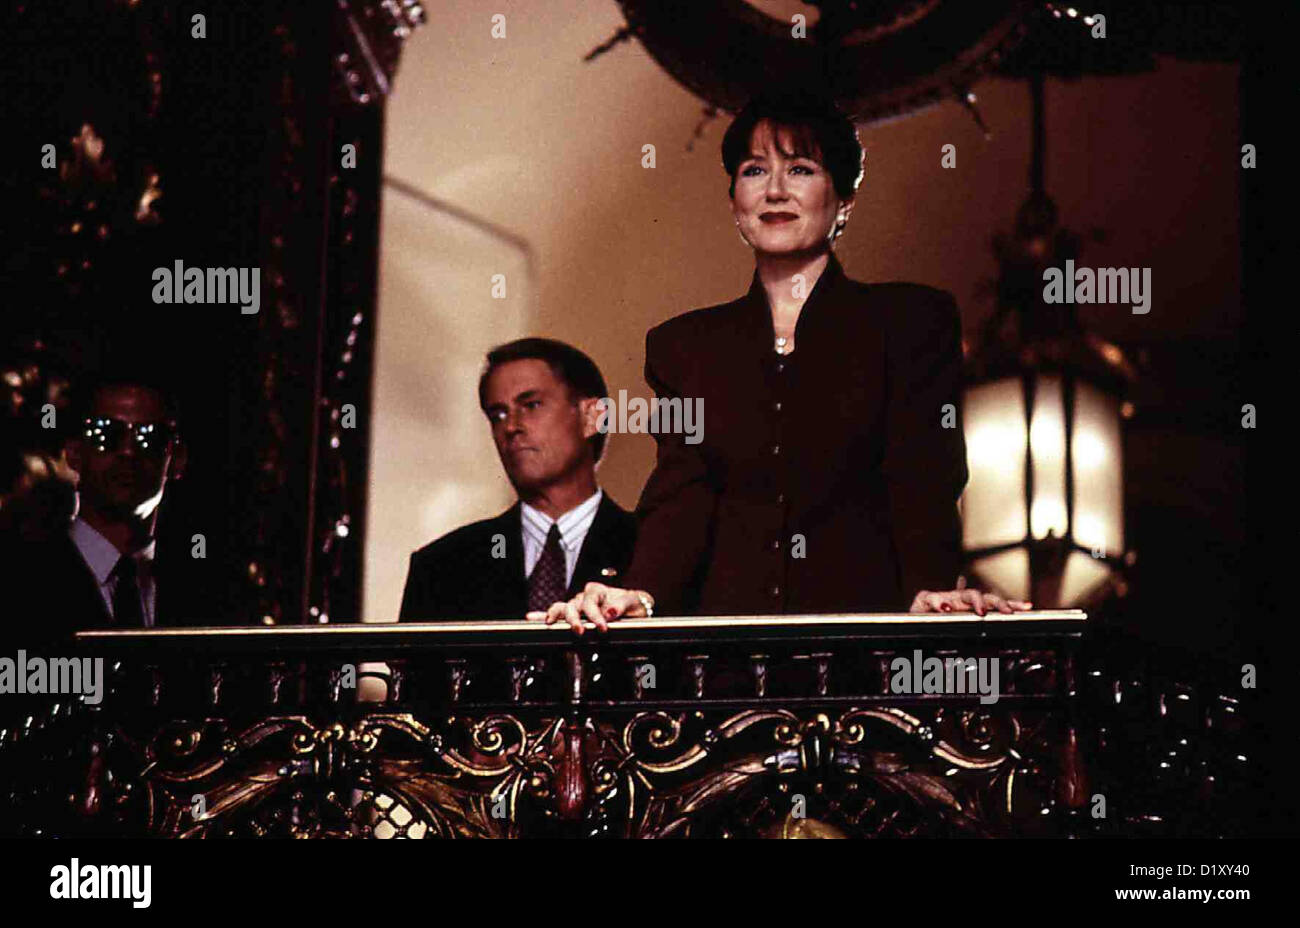 Independence Day   Independence Day   Marilyn Whitmore (Mary McDonnell) *** Local Caption *** 1996  FOX , clips 09/97 Stock Photo